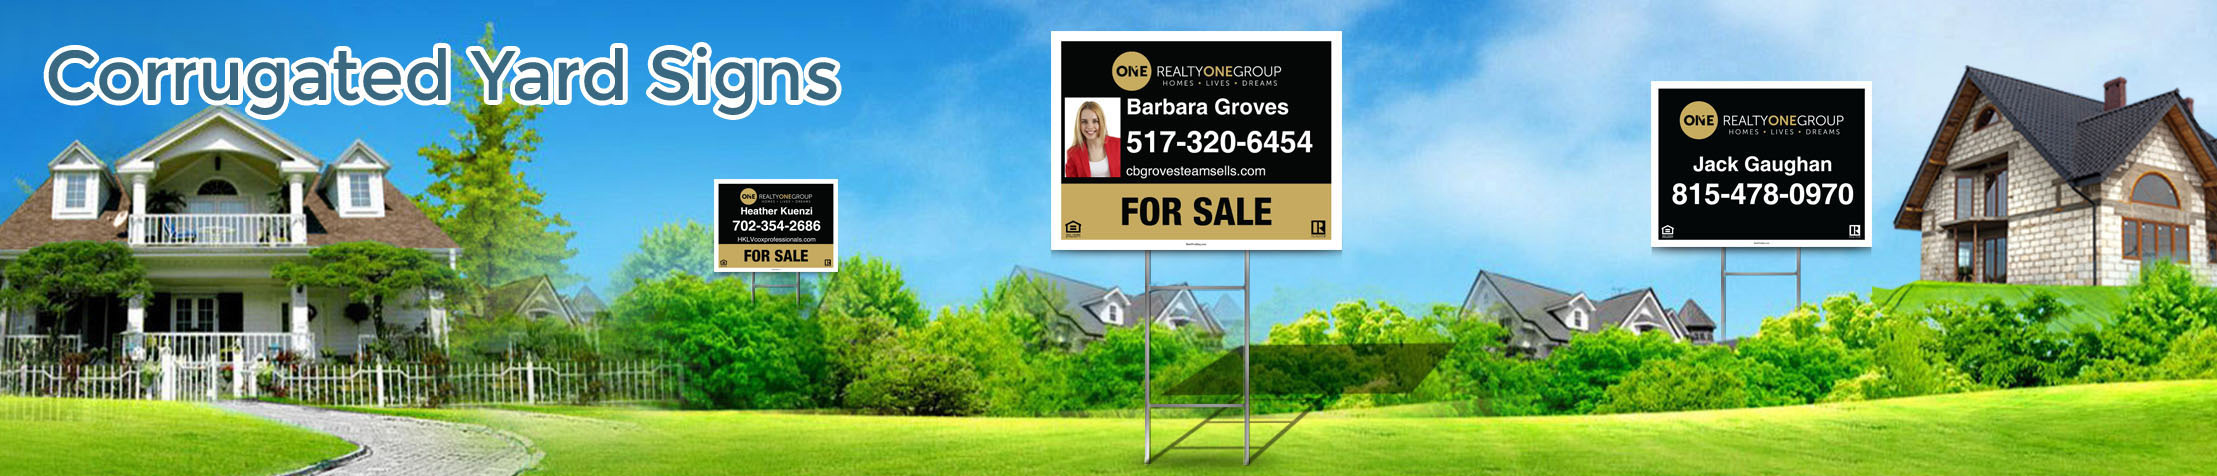 Realty One Group Real Estate Corrugated Yard Signs - Realty One Group  real estate signs | BestPrintBuy.com